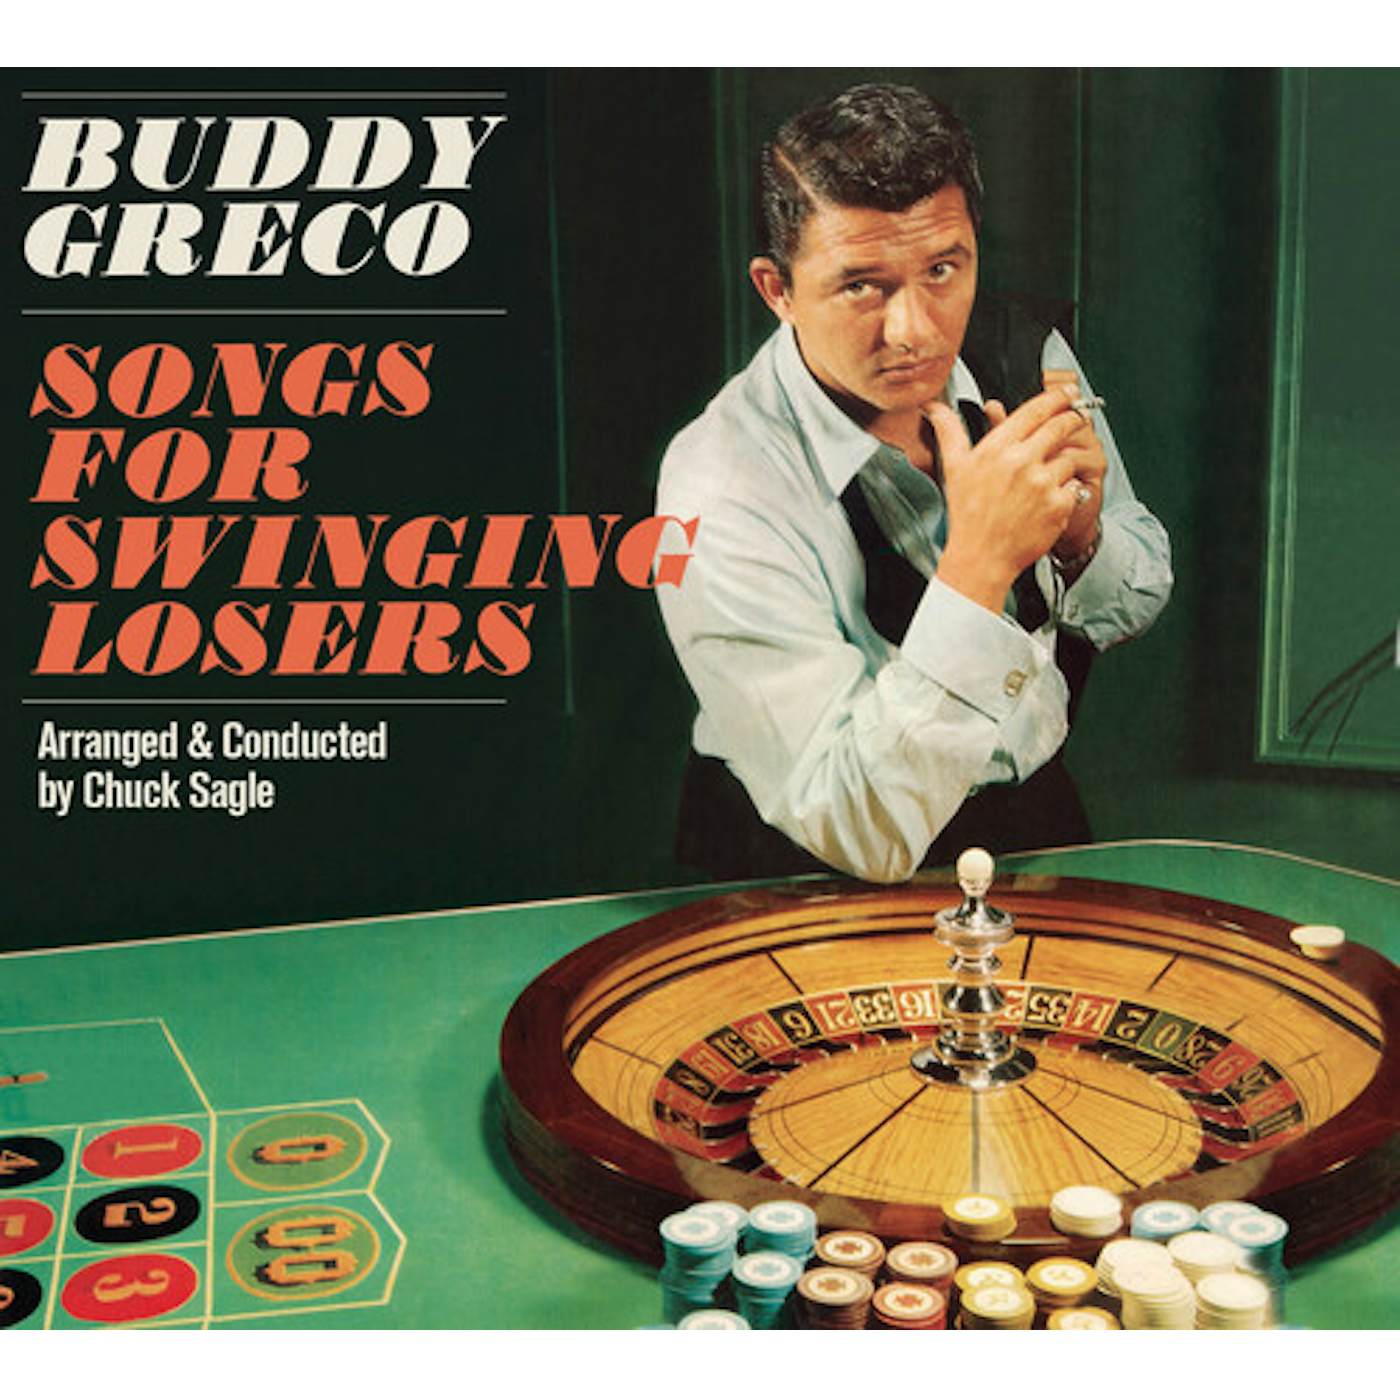 SONGS FOR SWINGING LOSERS / BUDDY GRECO LIVE CD